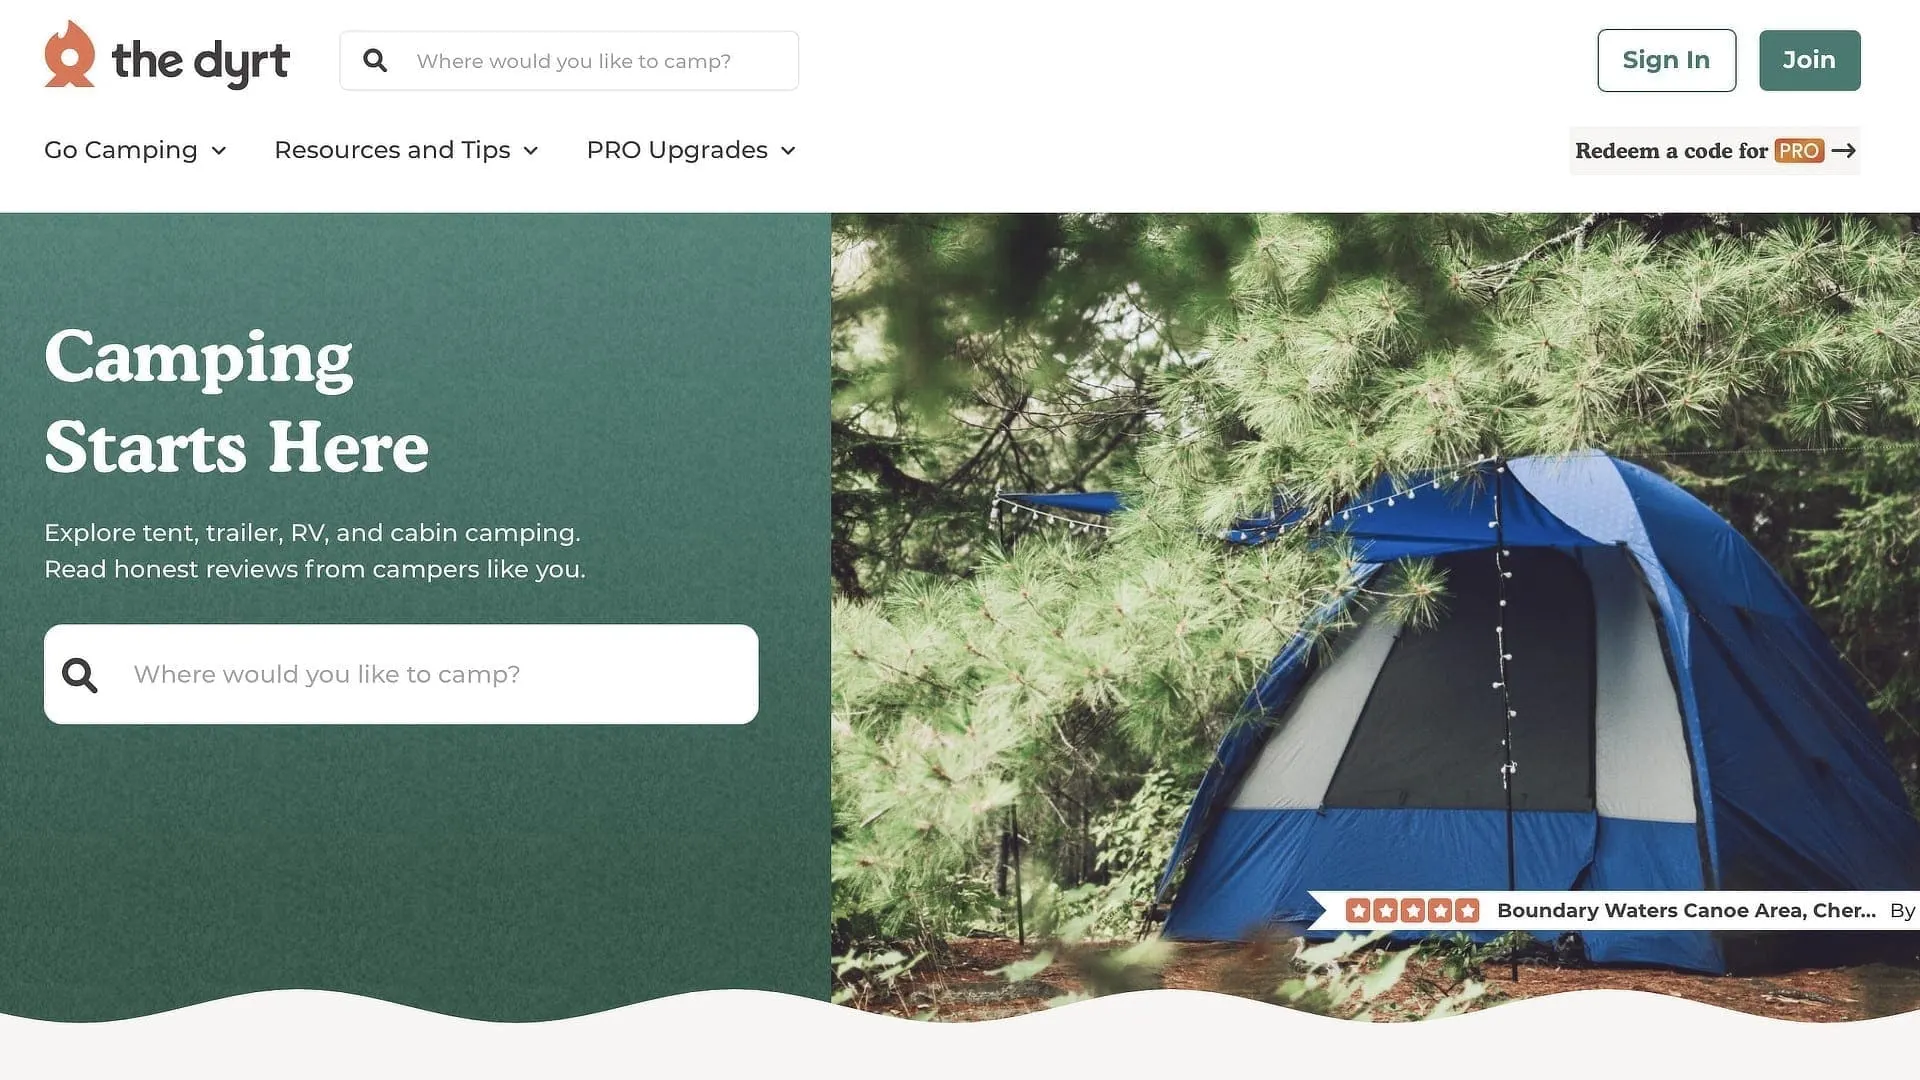 The Dyrt app gives you many ways to search for the perfect campground for you.